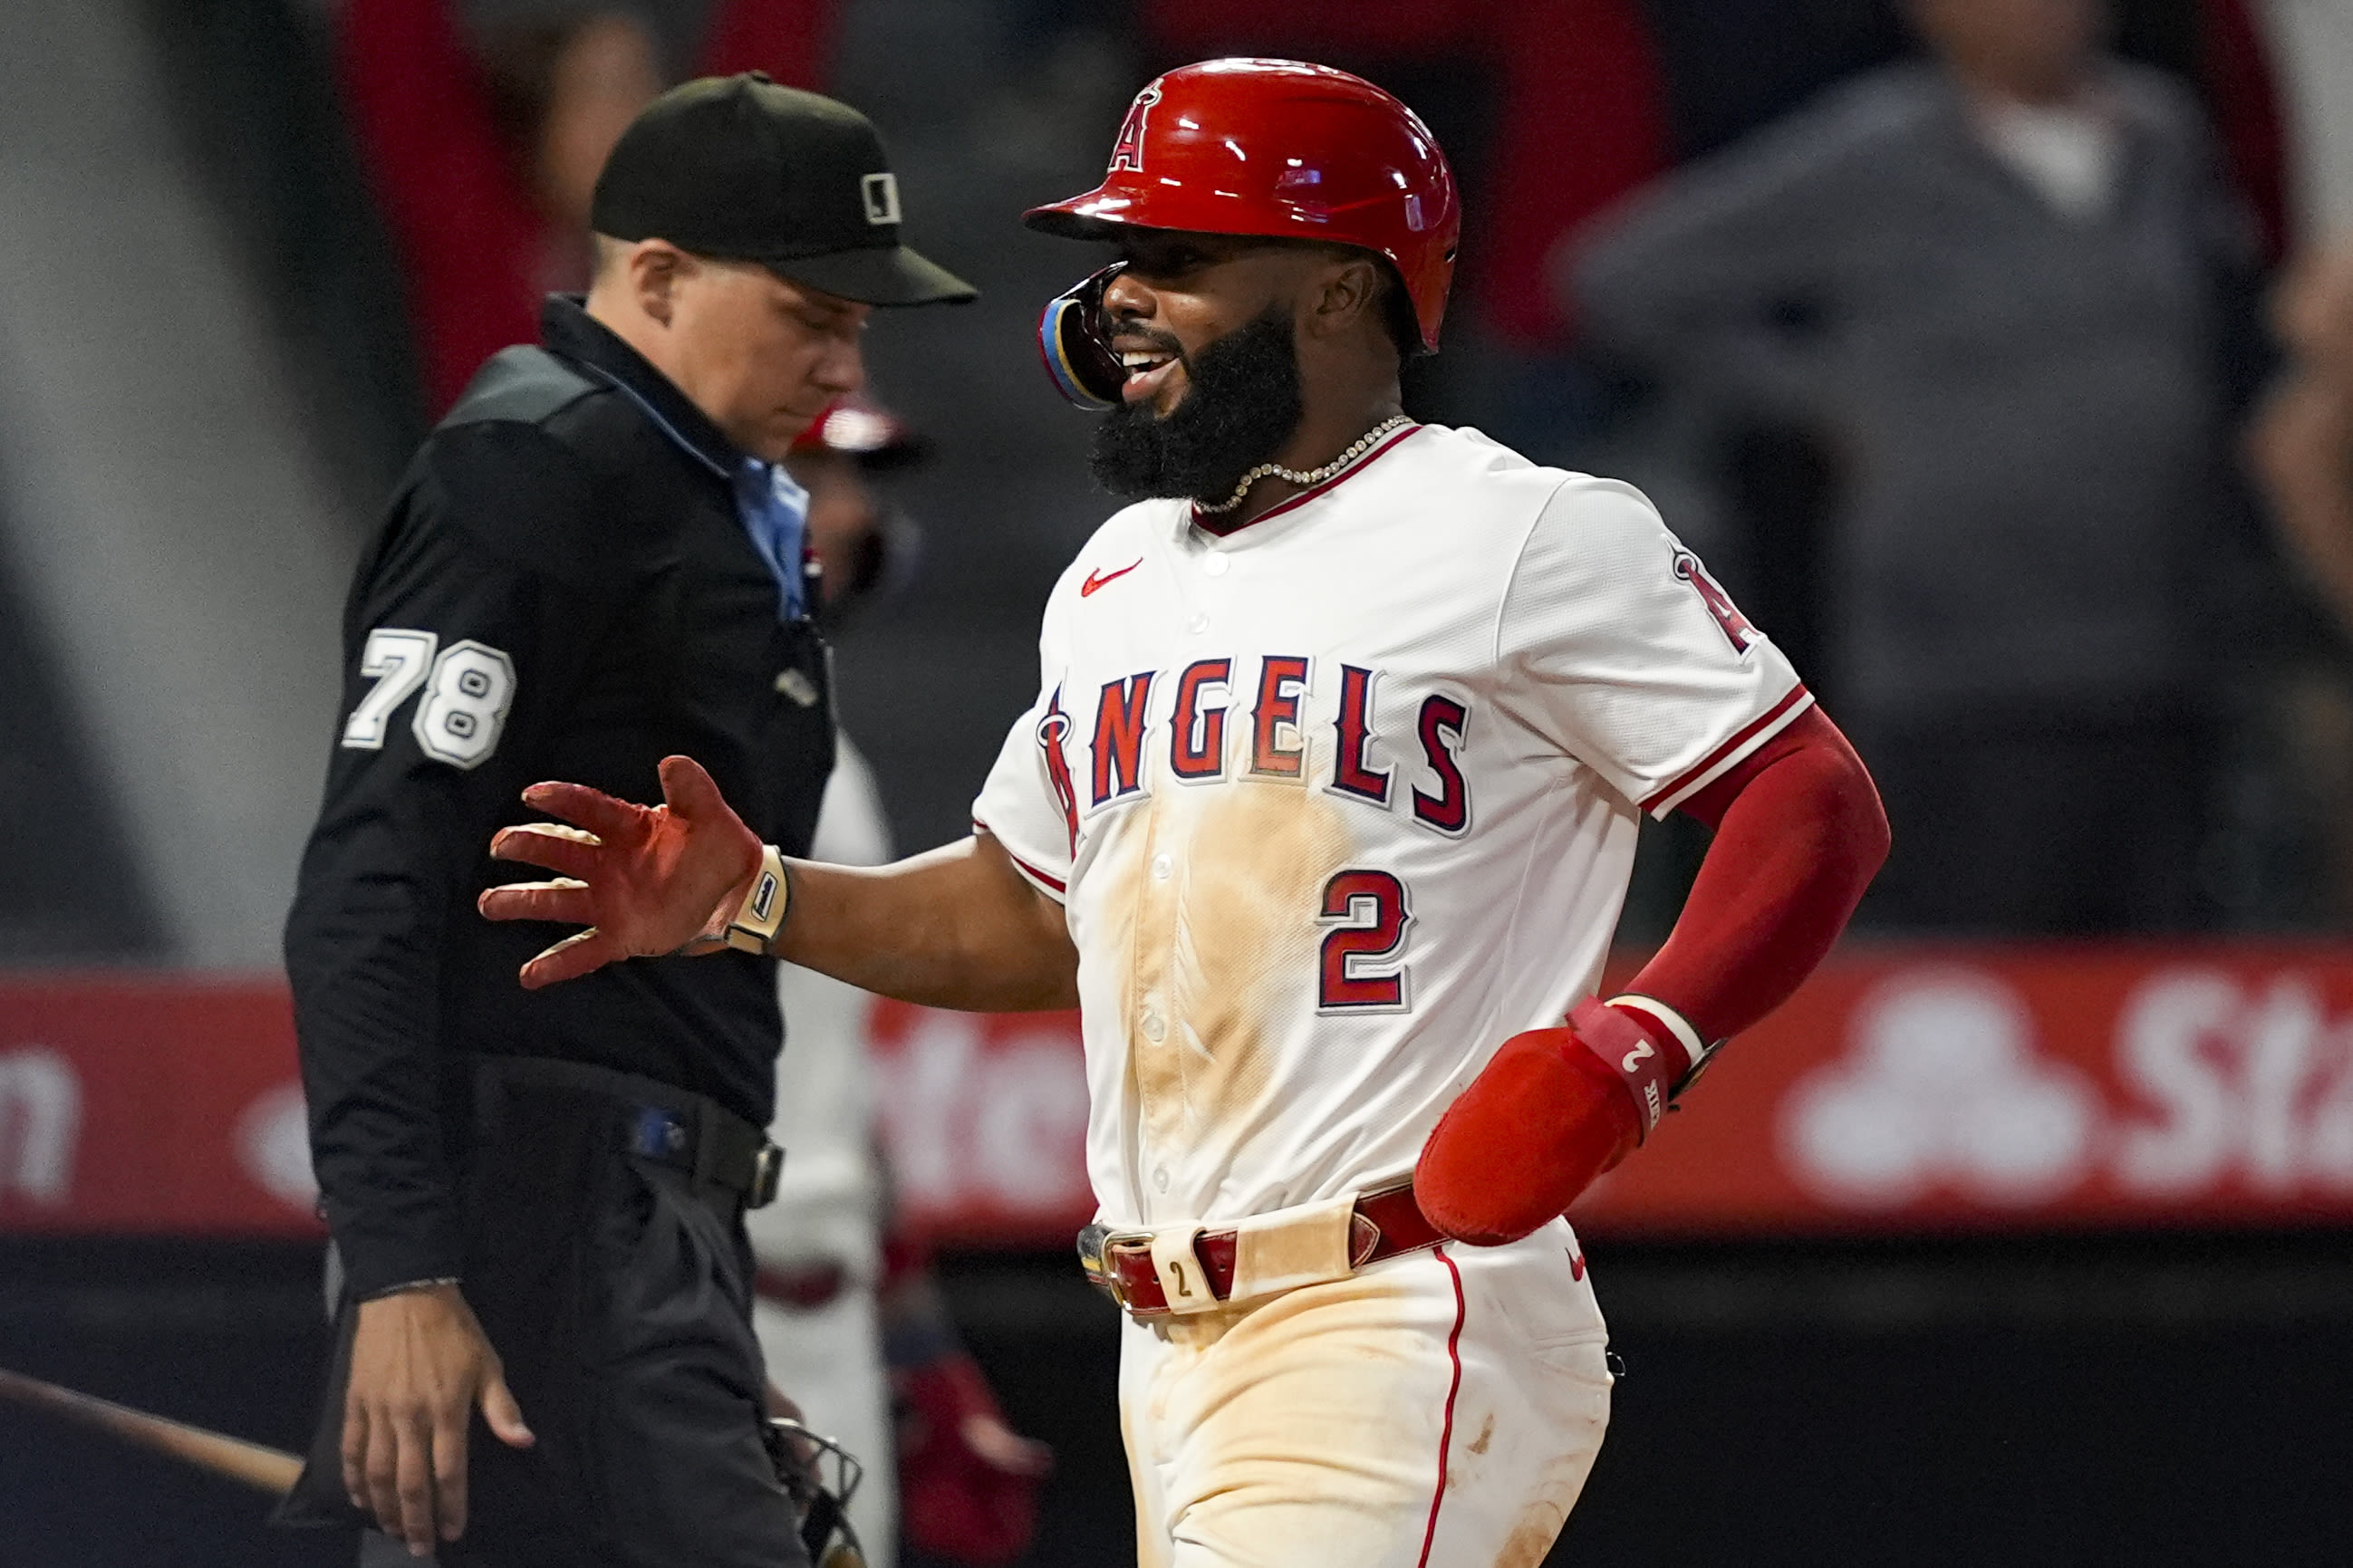 Angels rally to defeat the Yankees on Taylor Ward's double